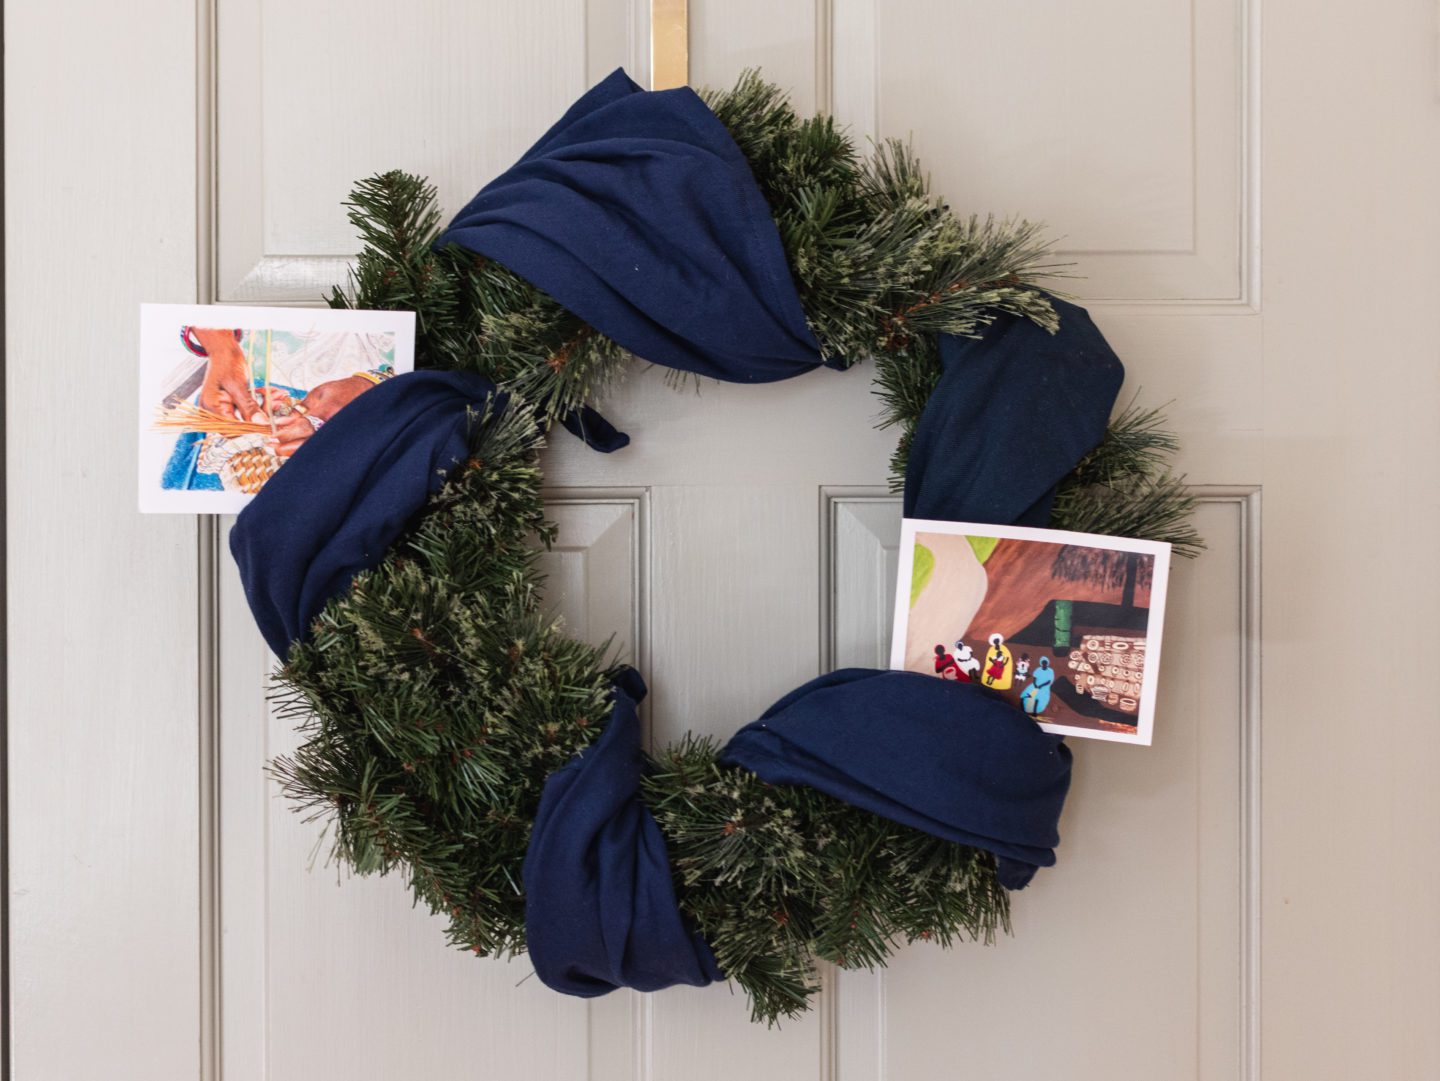 Holidays with Heritage: DIY Holiday Wreaths with Heritage